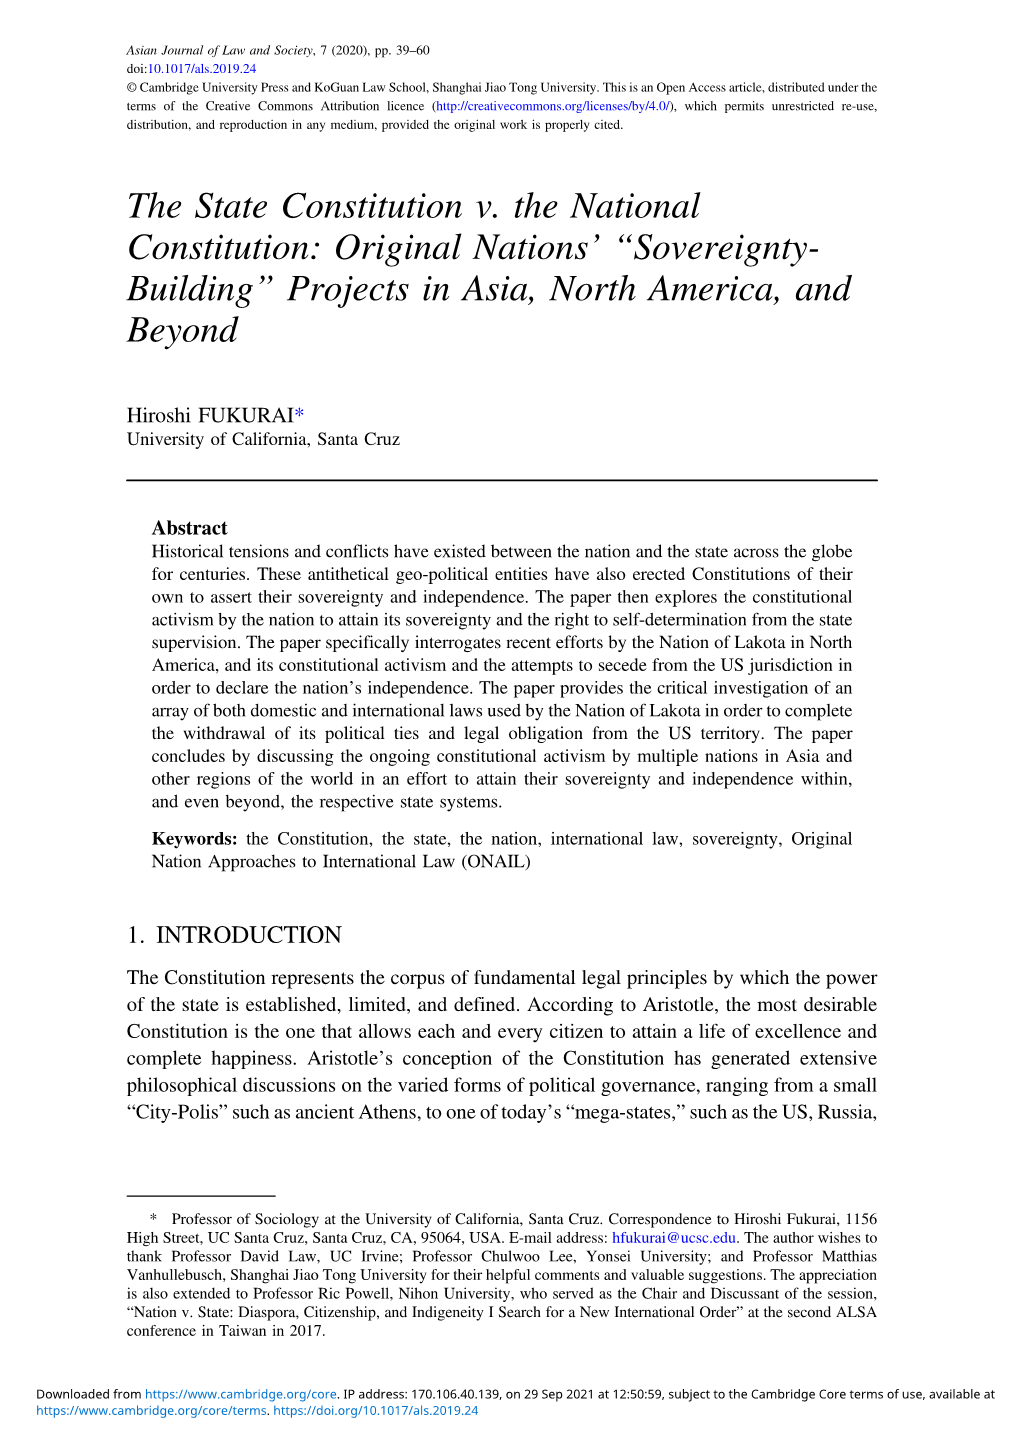 Original Nations' ``Sovereignty-Building'' Projects In